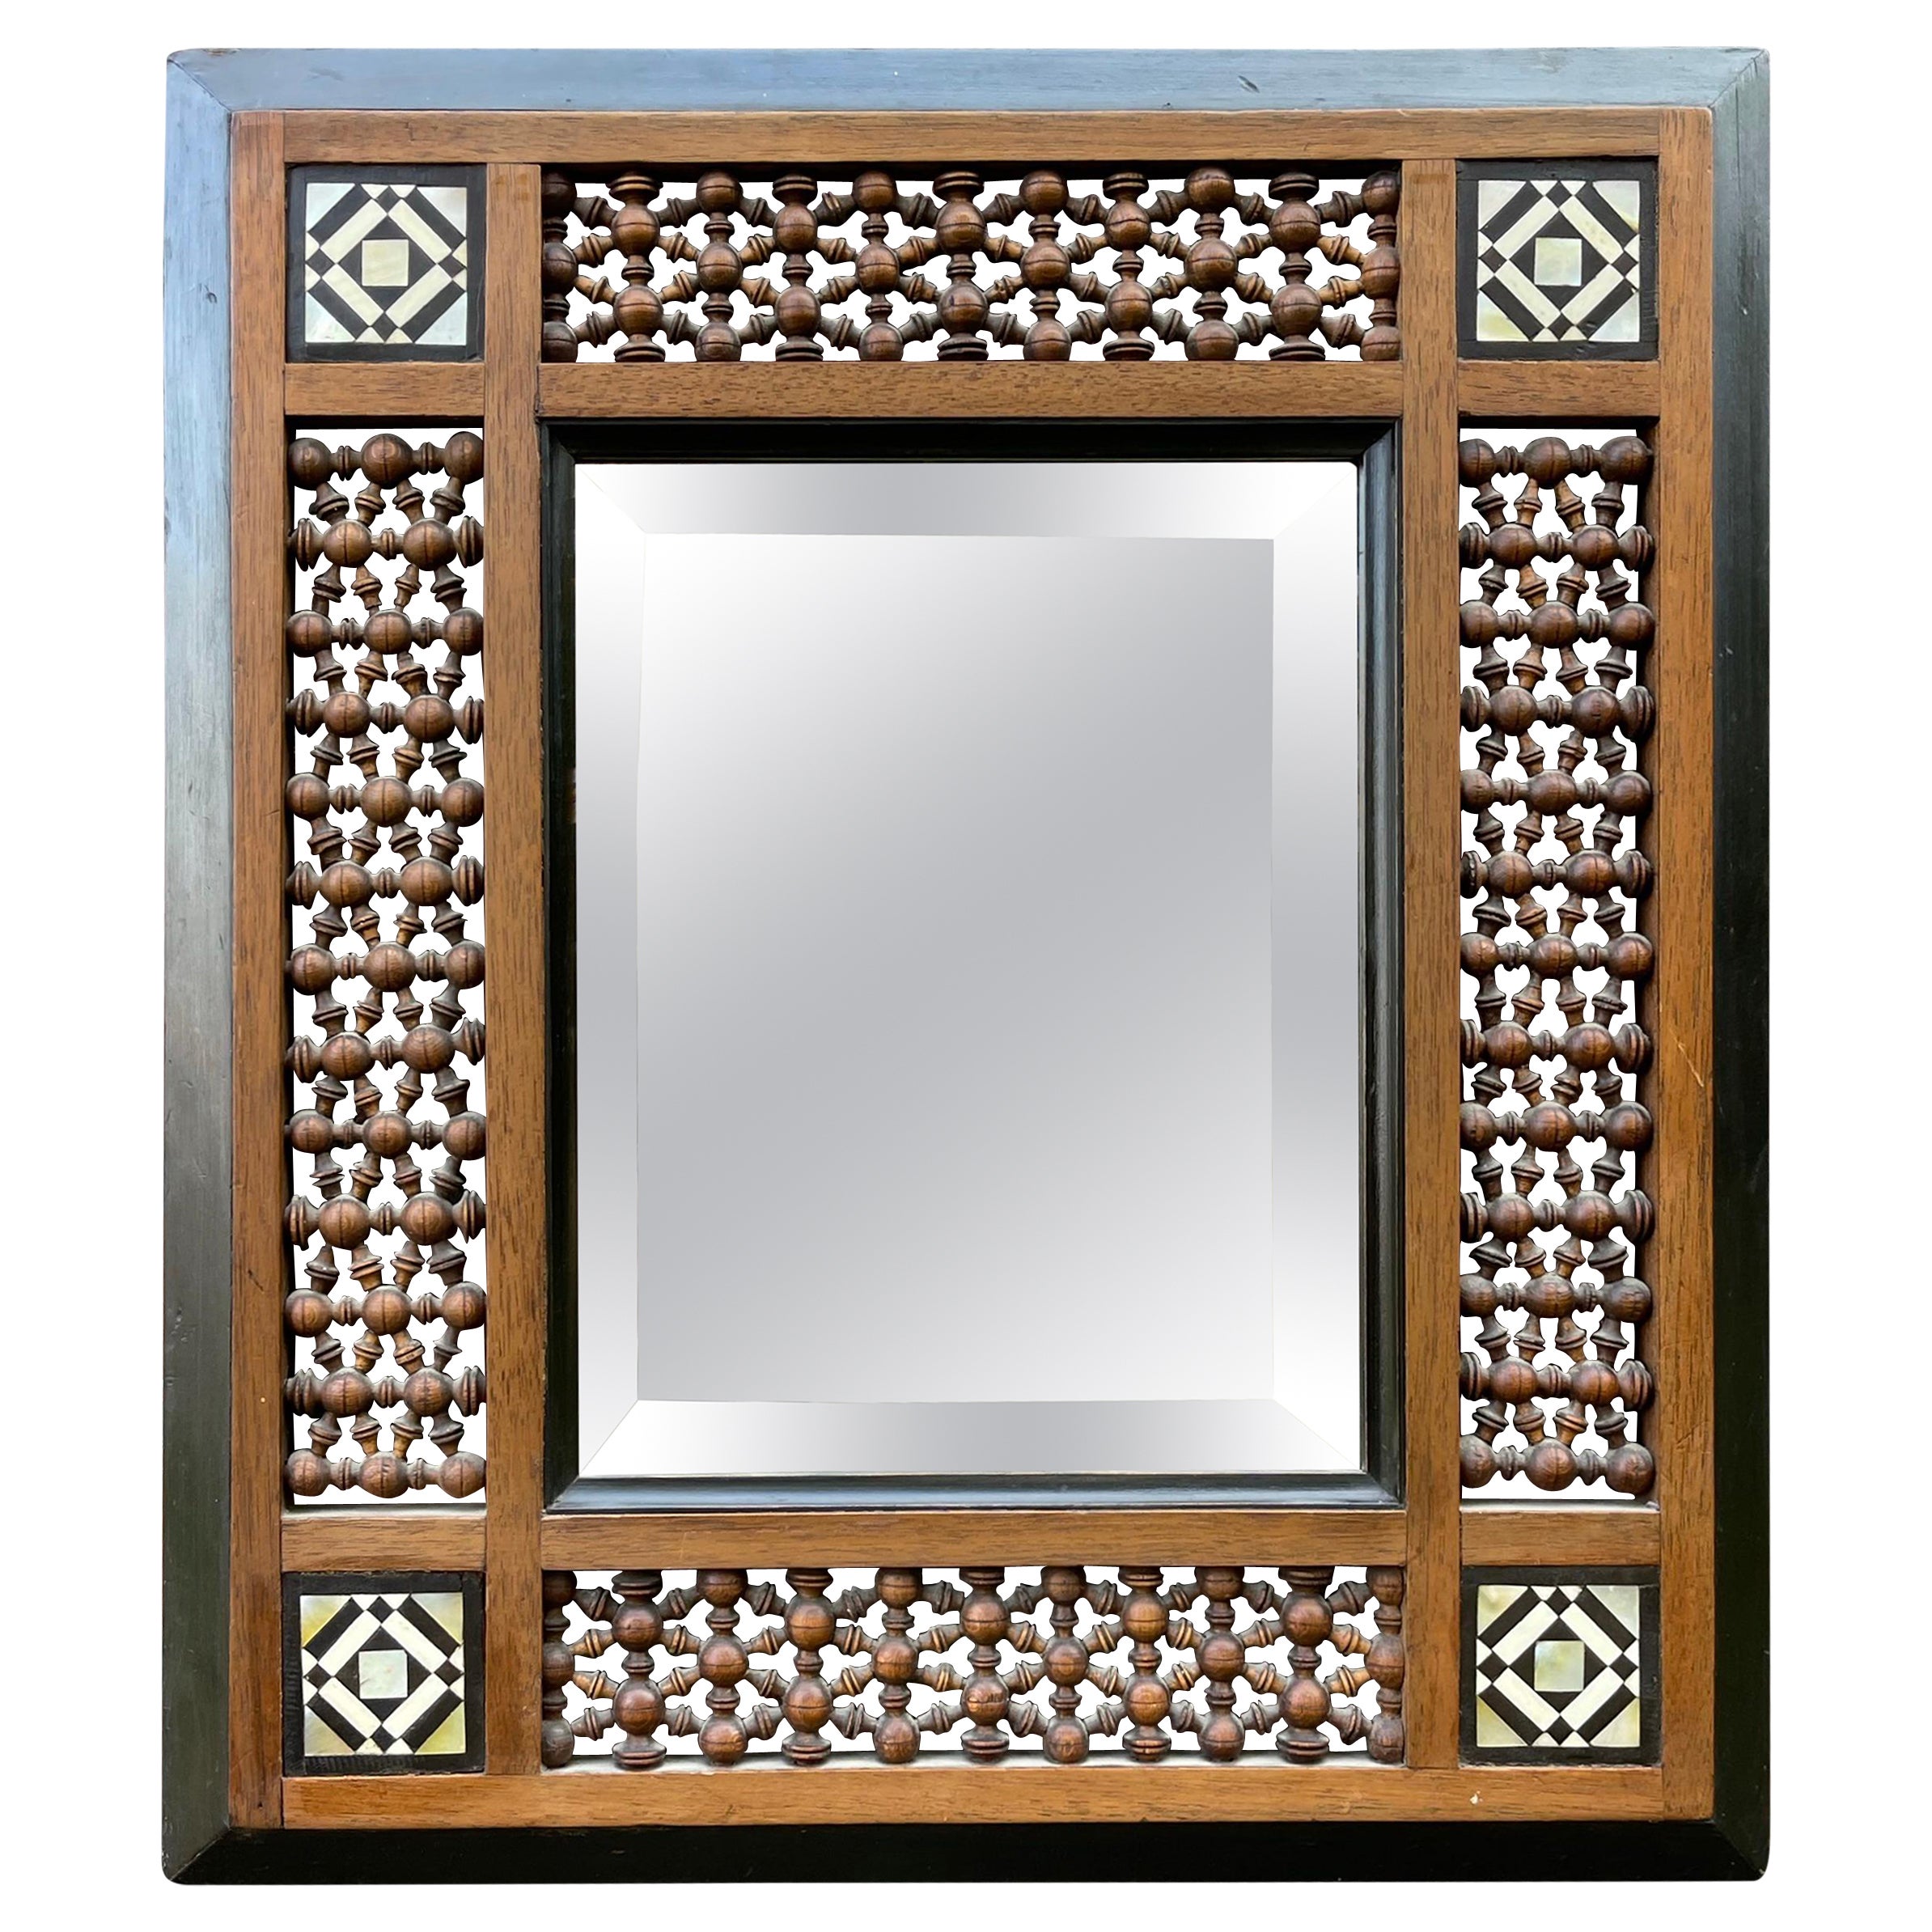 Stunning Spanish Antique Wooden Picture Frame / Mirror, Inlaid and Turned Motifs For Sale